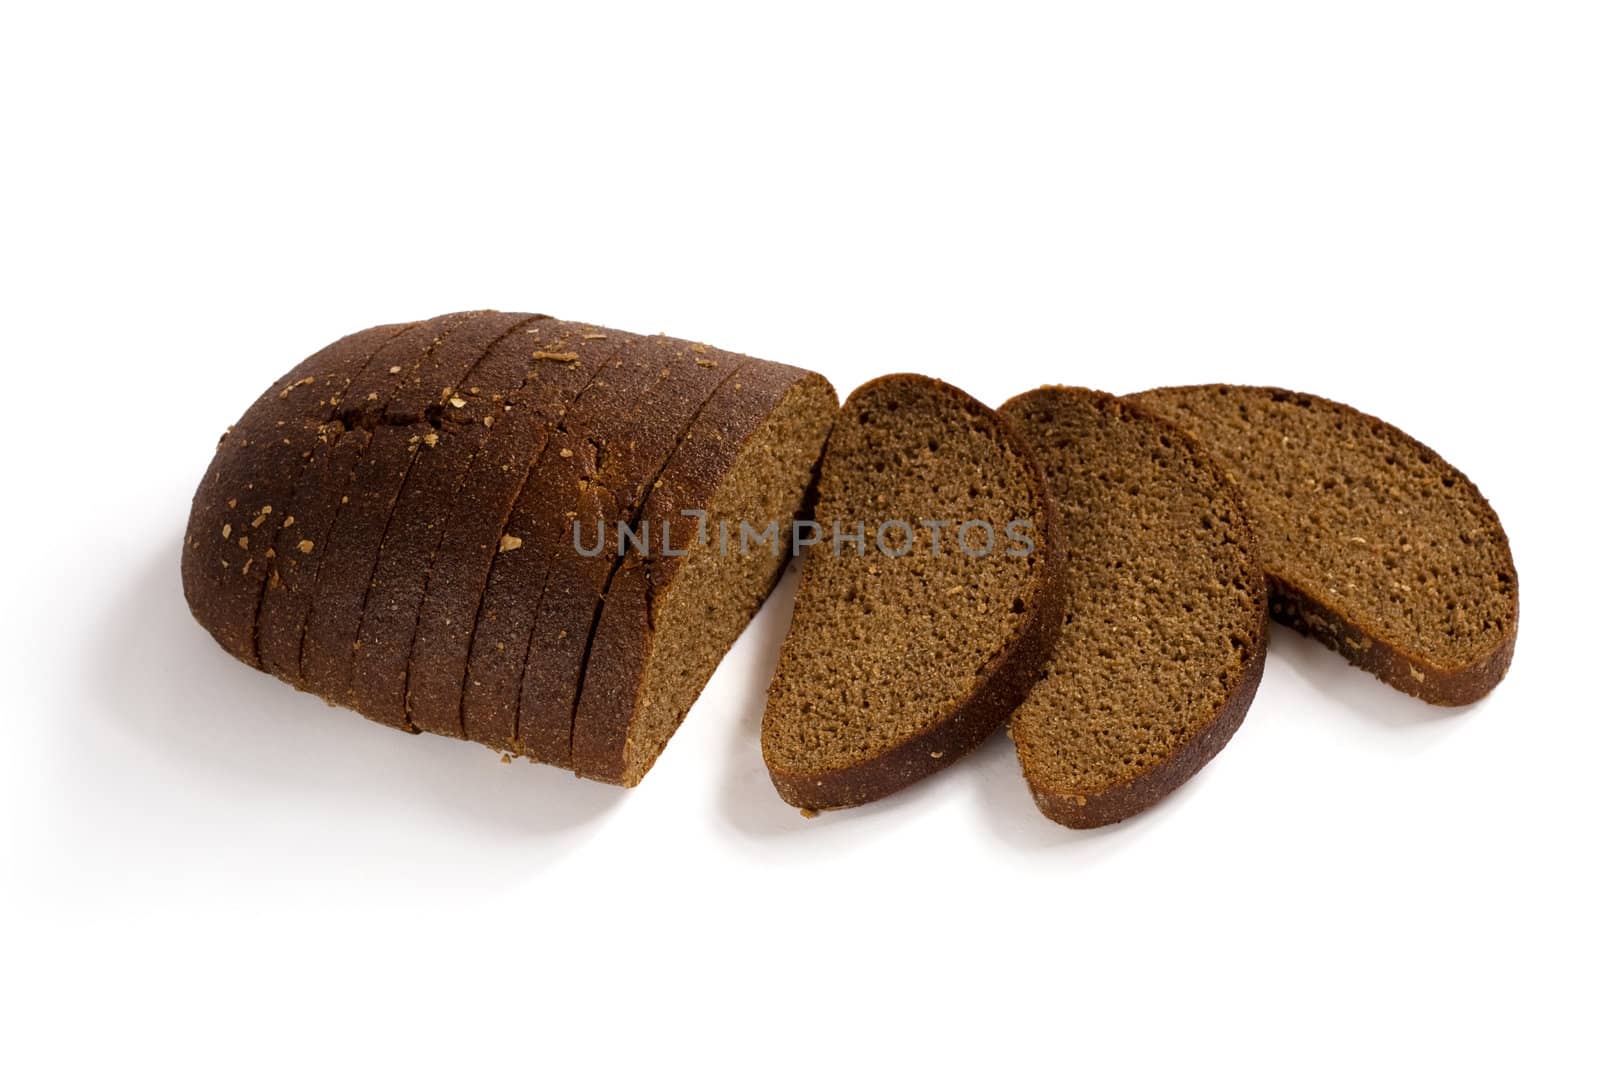 Sliced brown rye bread with shadow on white background. Clipping path included to easy remove shadow.